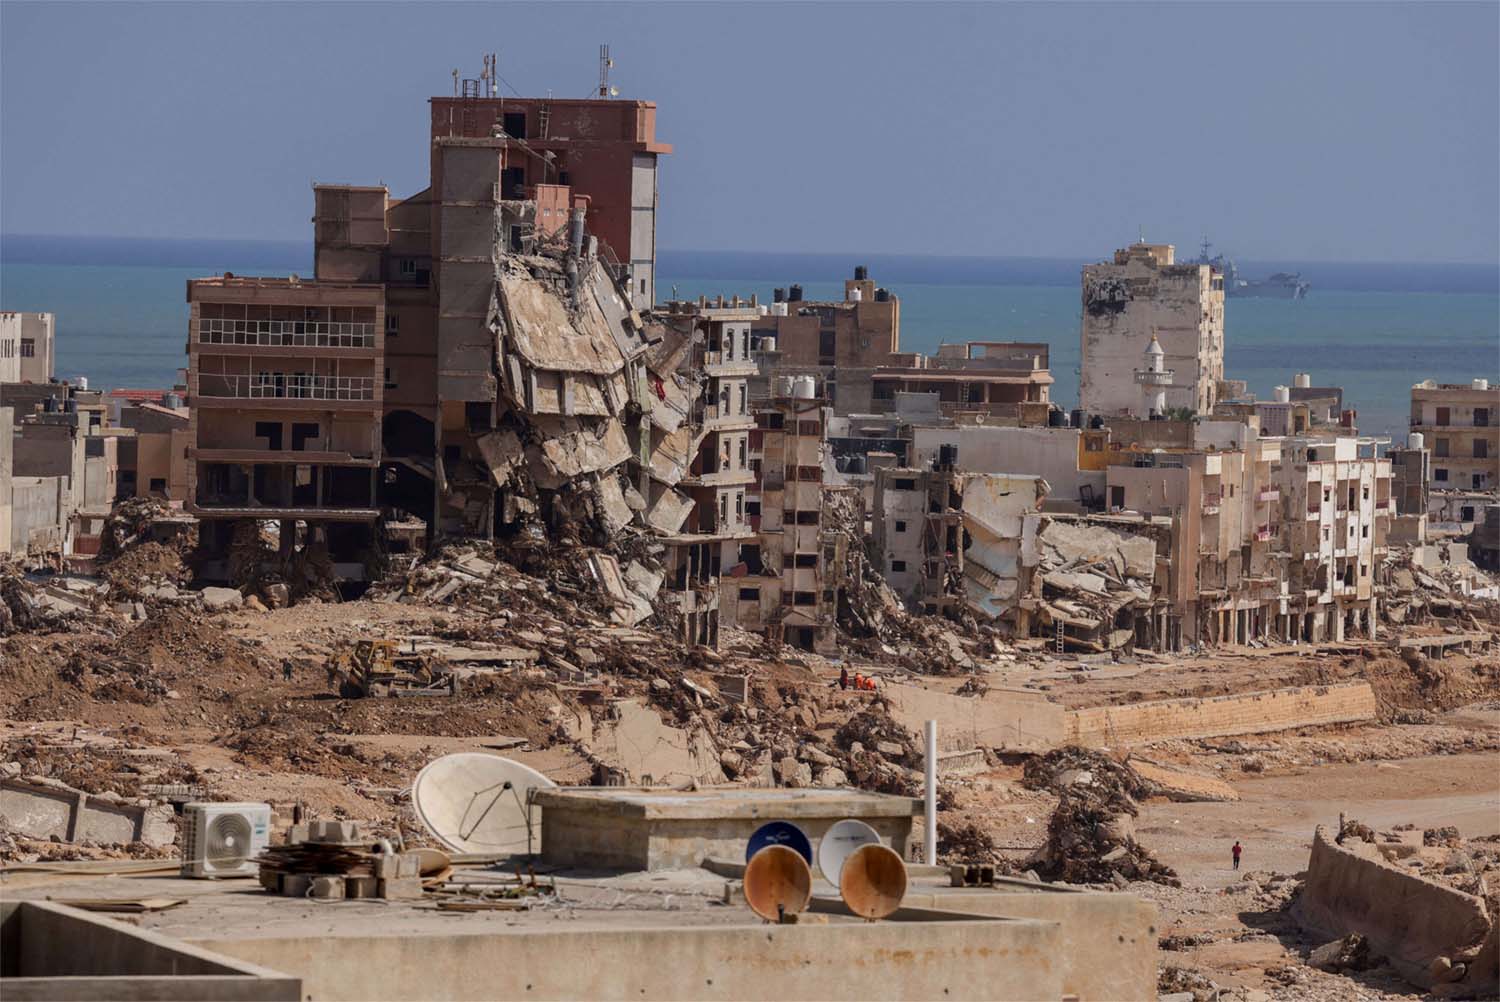 A view shows destroyed buildings in the aftermath of the the deadly storm that hit Derna, in Libya